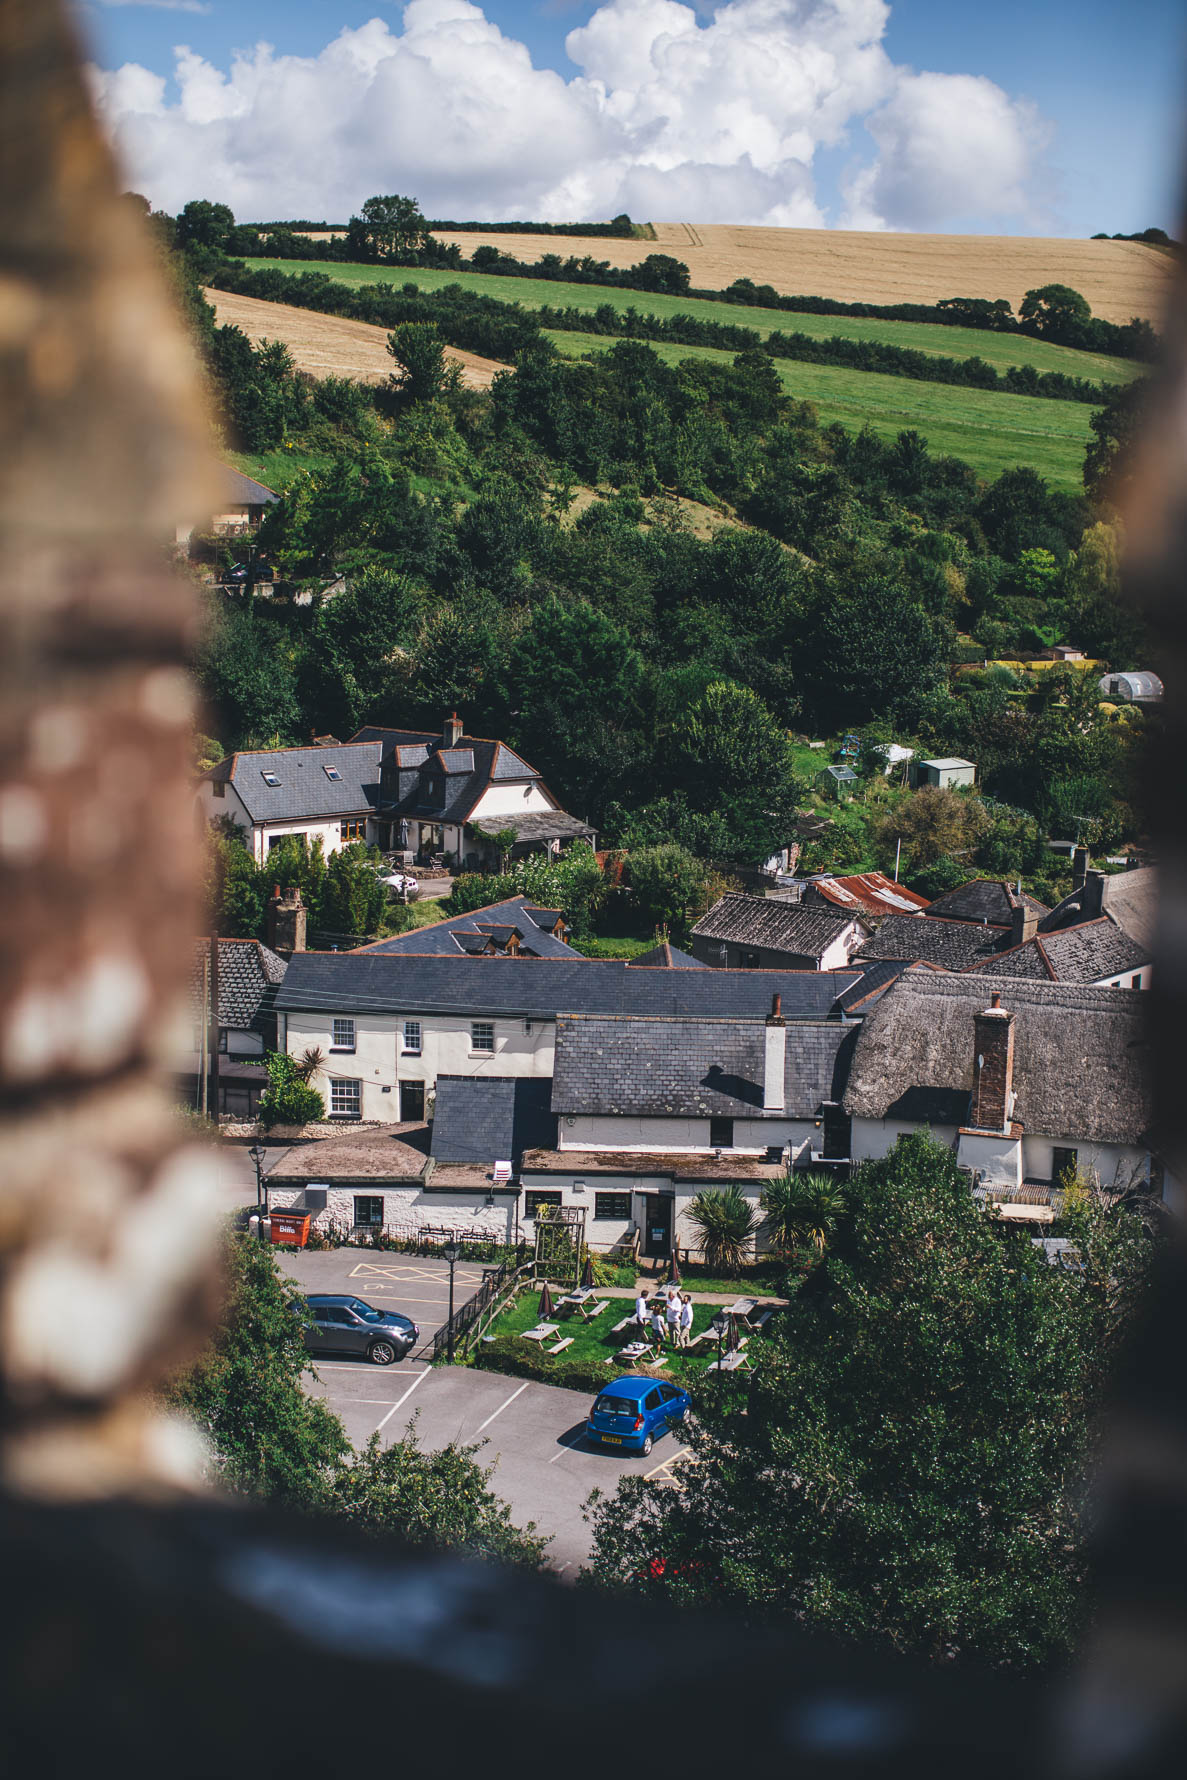 Rolling hillside in a Devonshire village taken from the top of a church looking down over the buildings in the village